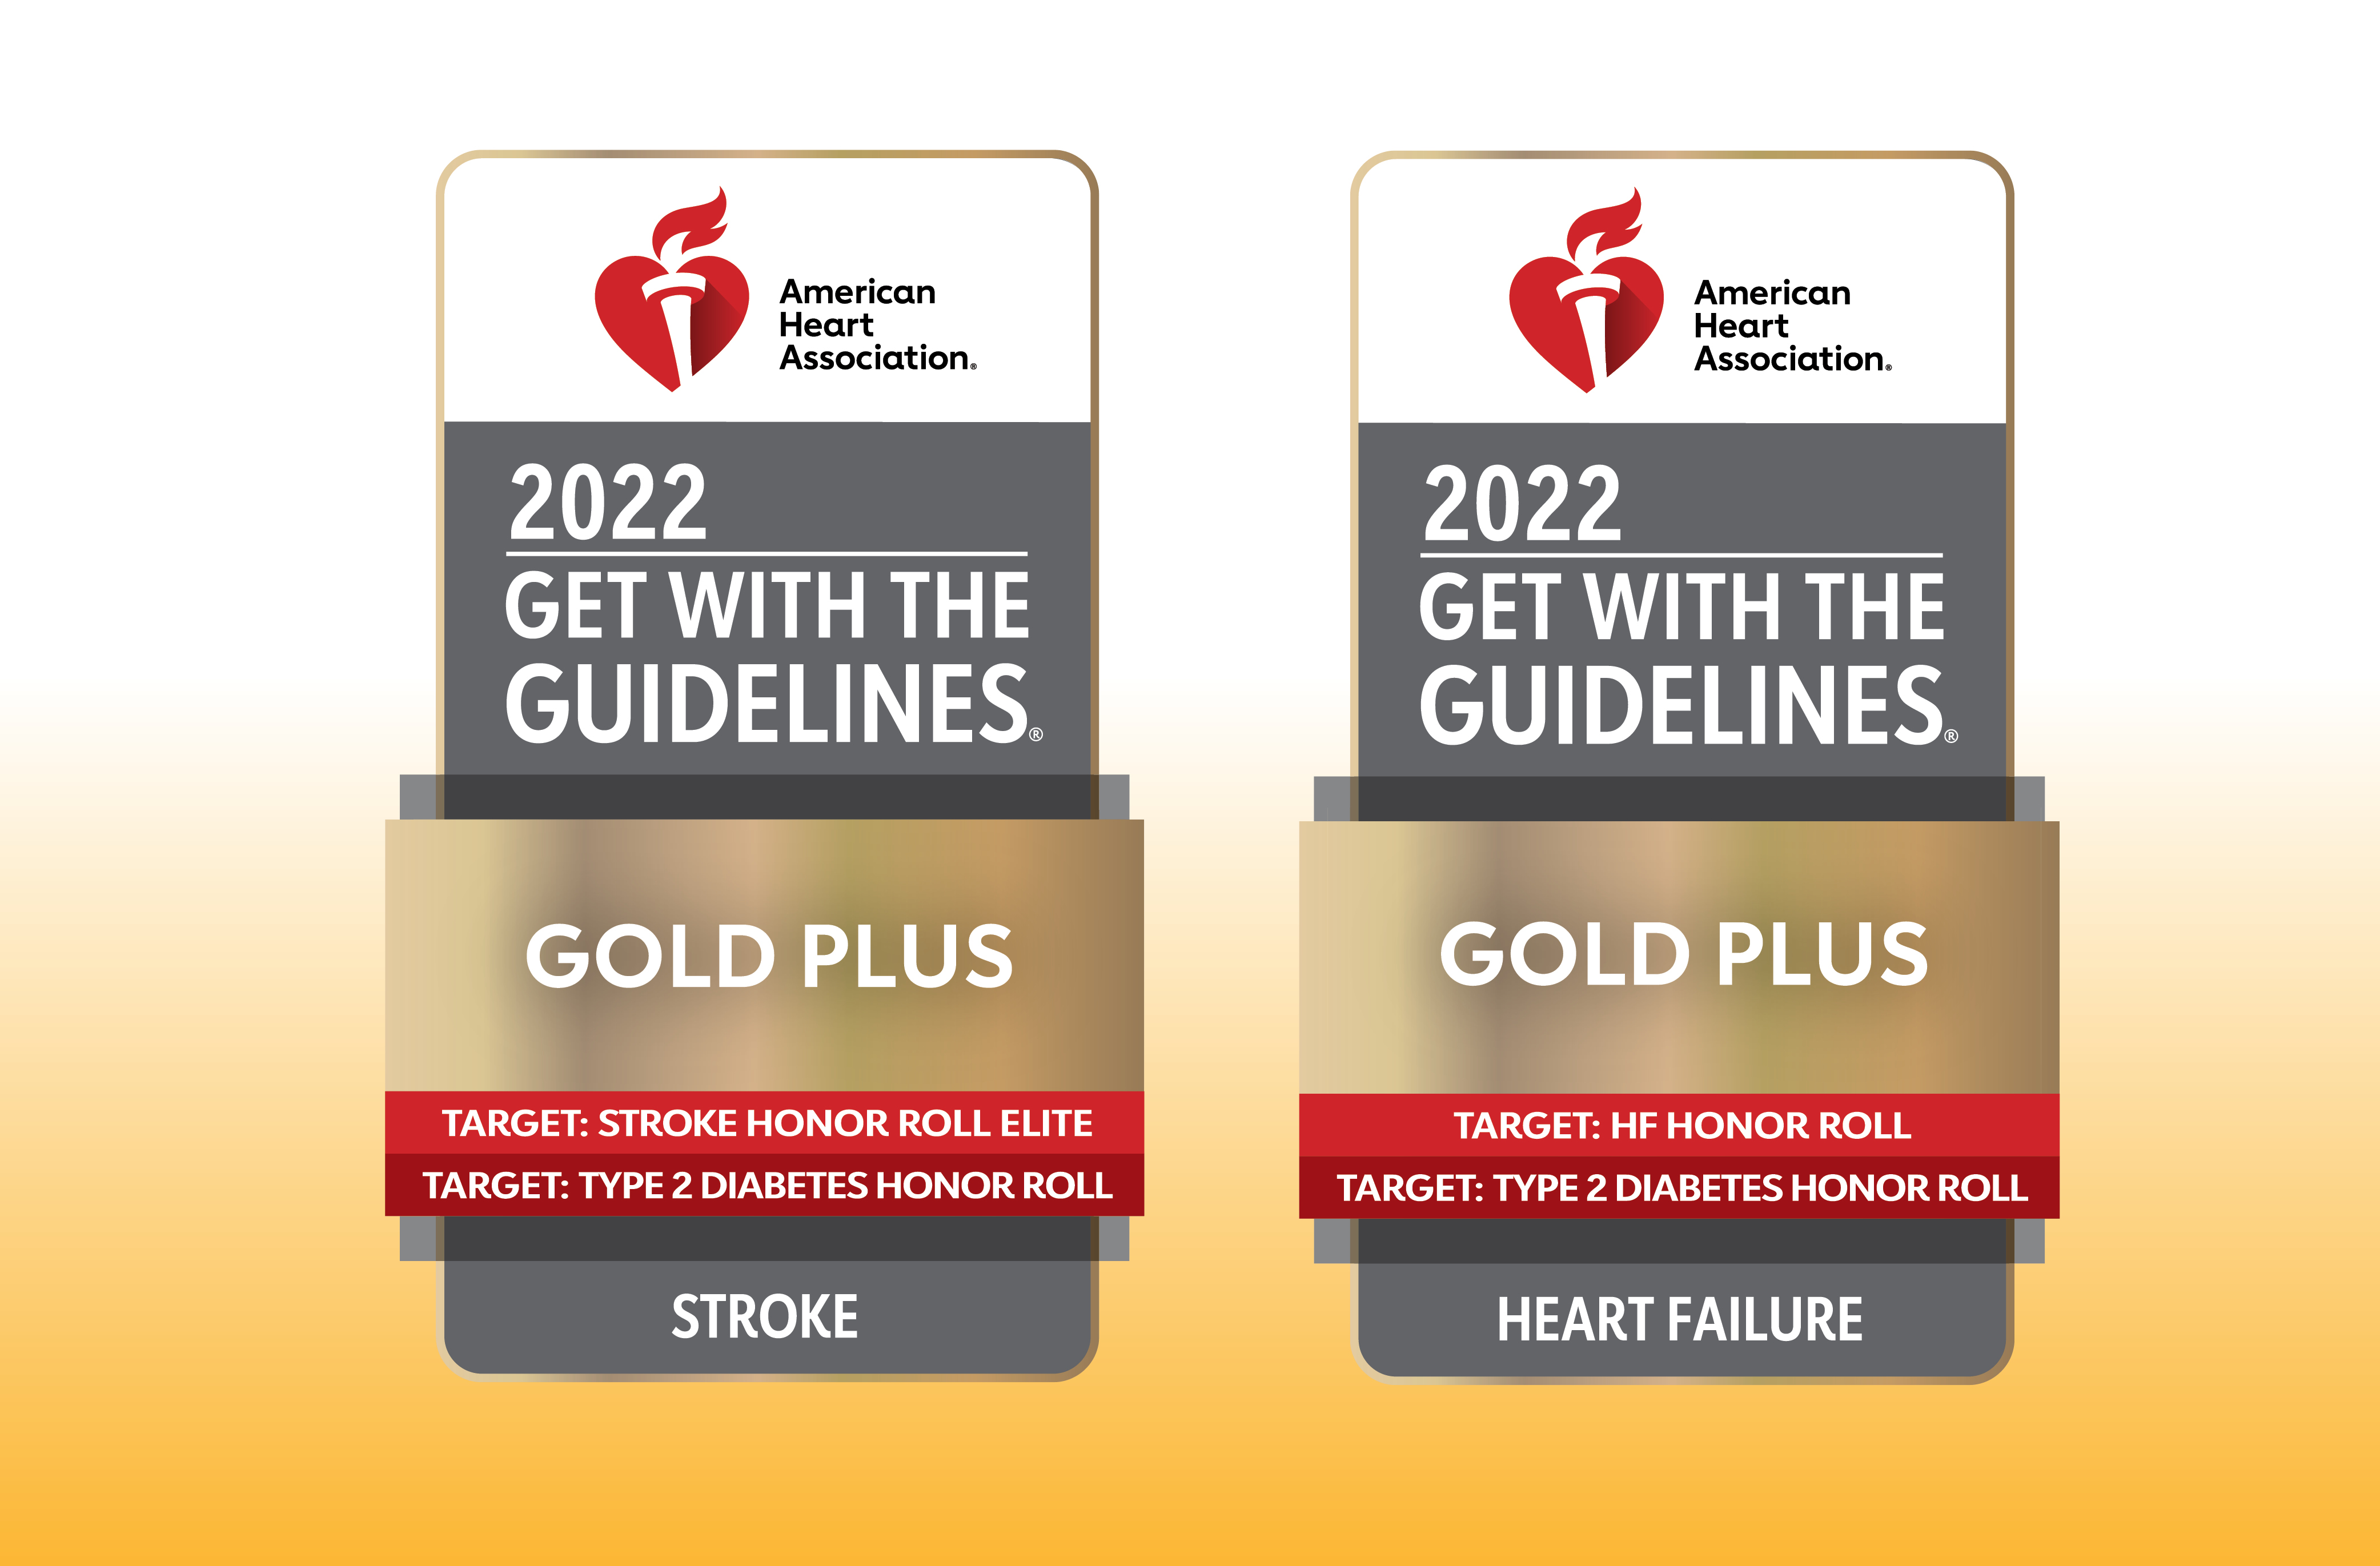 Penn Medicine Princeton Medical Center earned the American Heart Association’s Get With The Guidelines awards for stroke care and heart failure treatment.